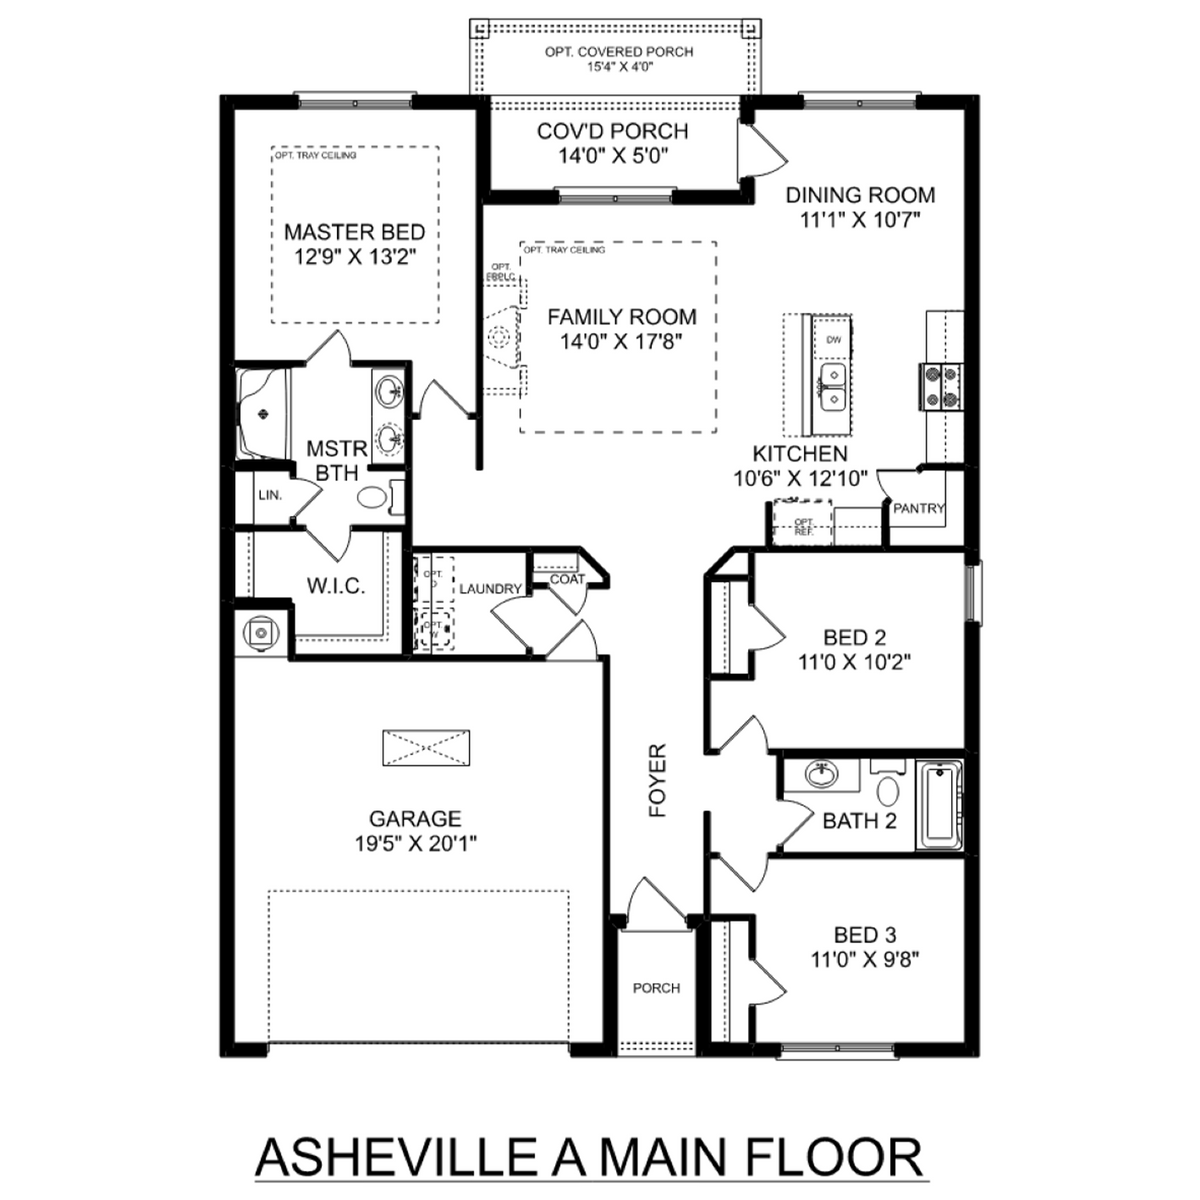 1 - The Asheville floor plan layout for 14127 Nursery Drive in Davidson Homes' The Meadows community.